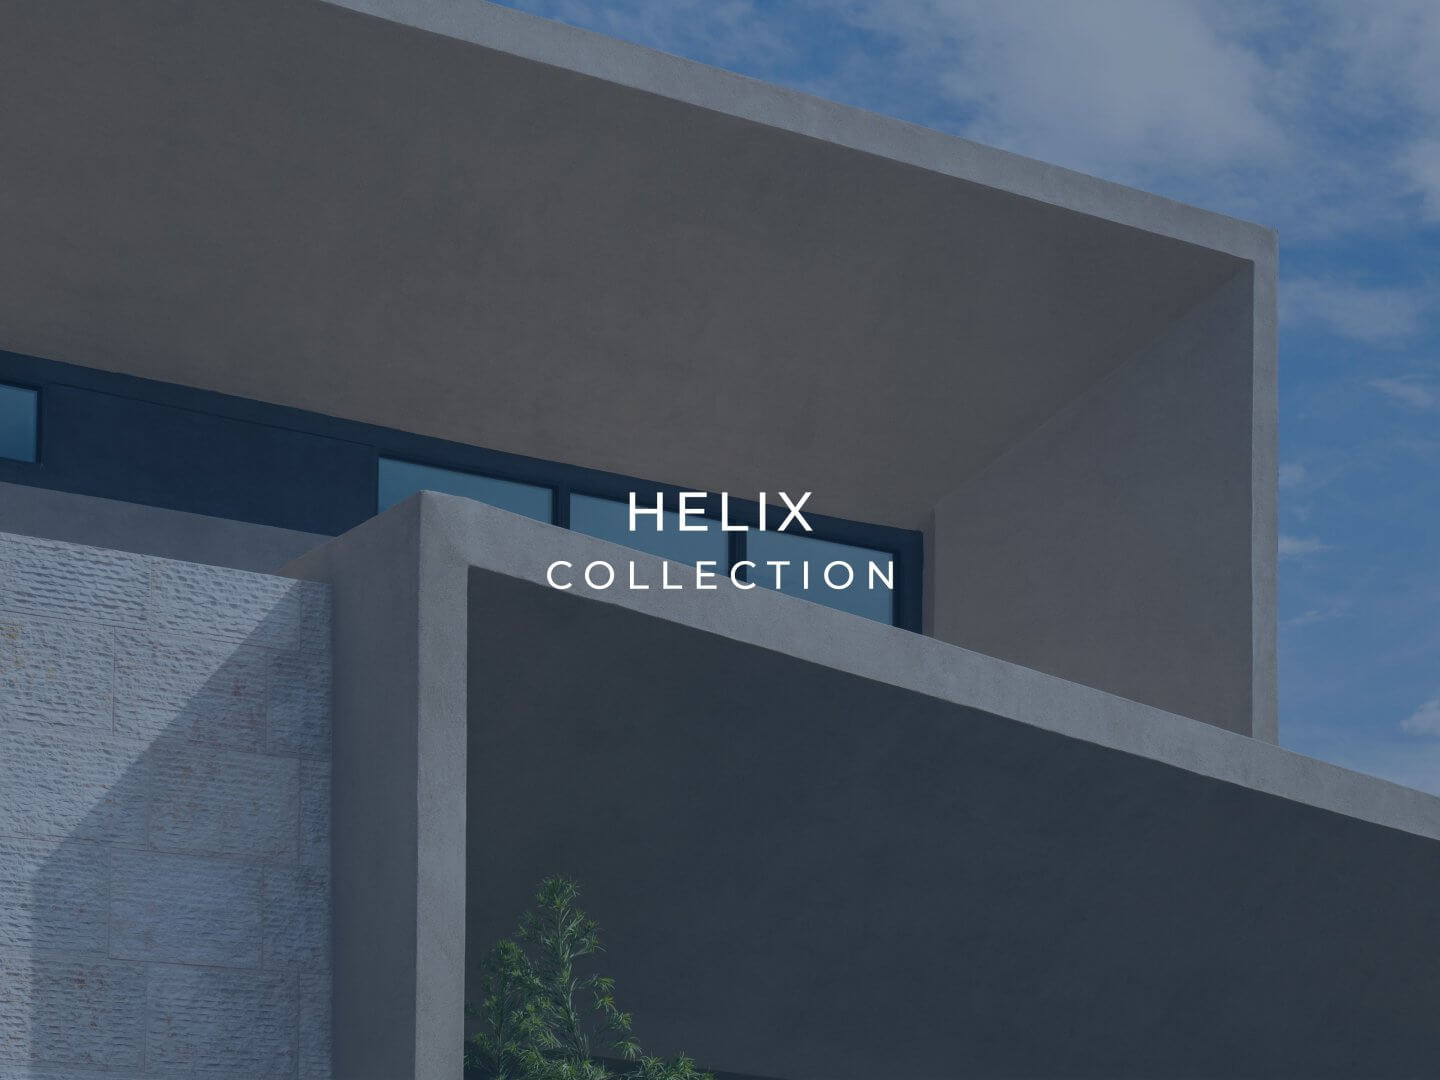 The Helix Collection